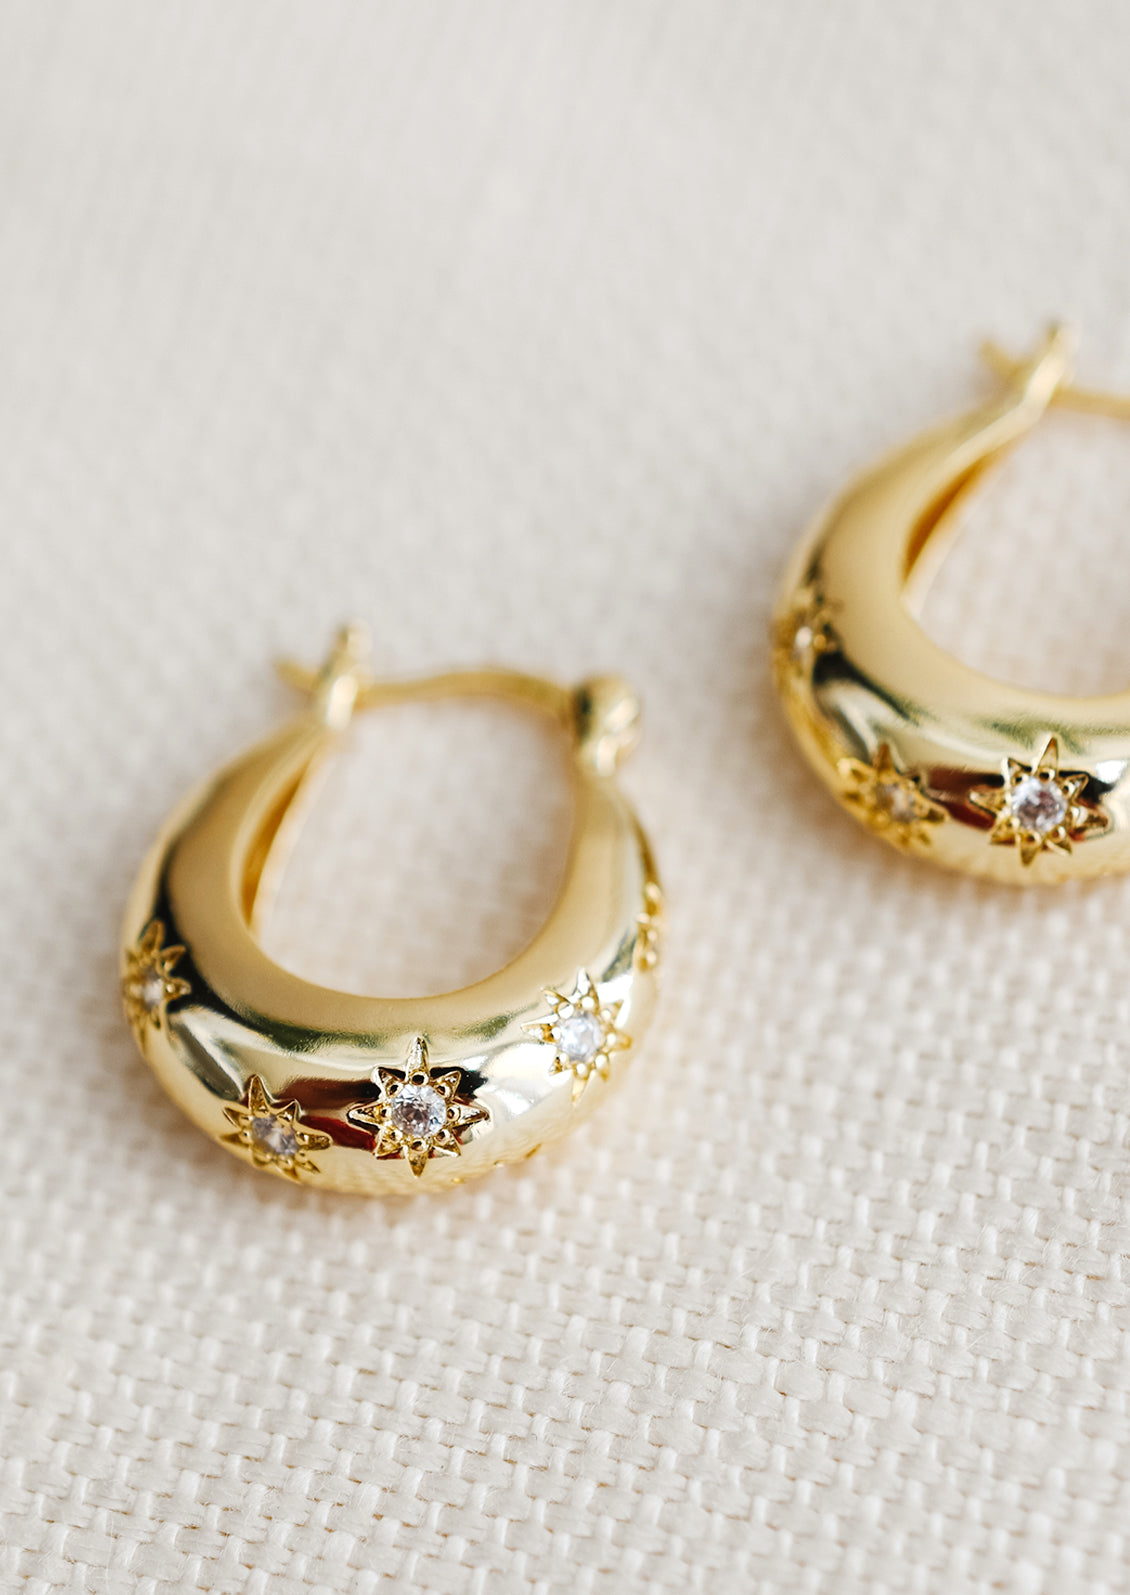 A pair of oblong oval hoops in gold with clear star shaped crystal detailing.